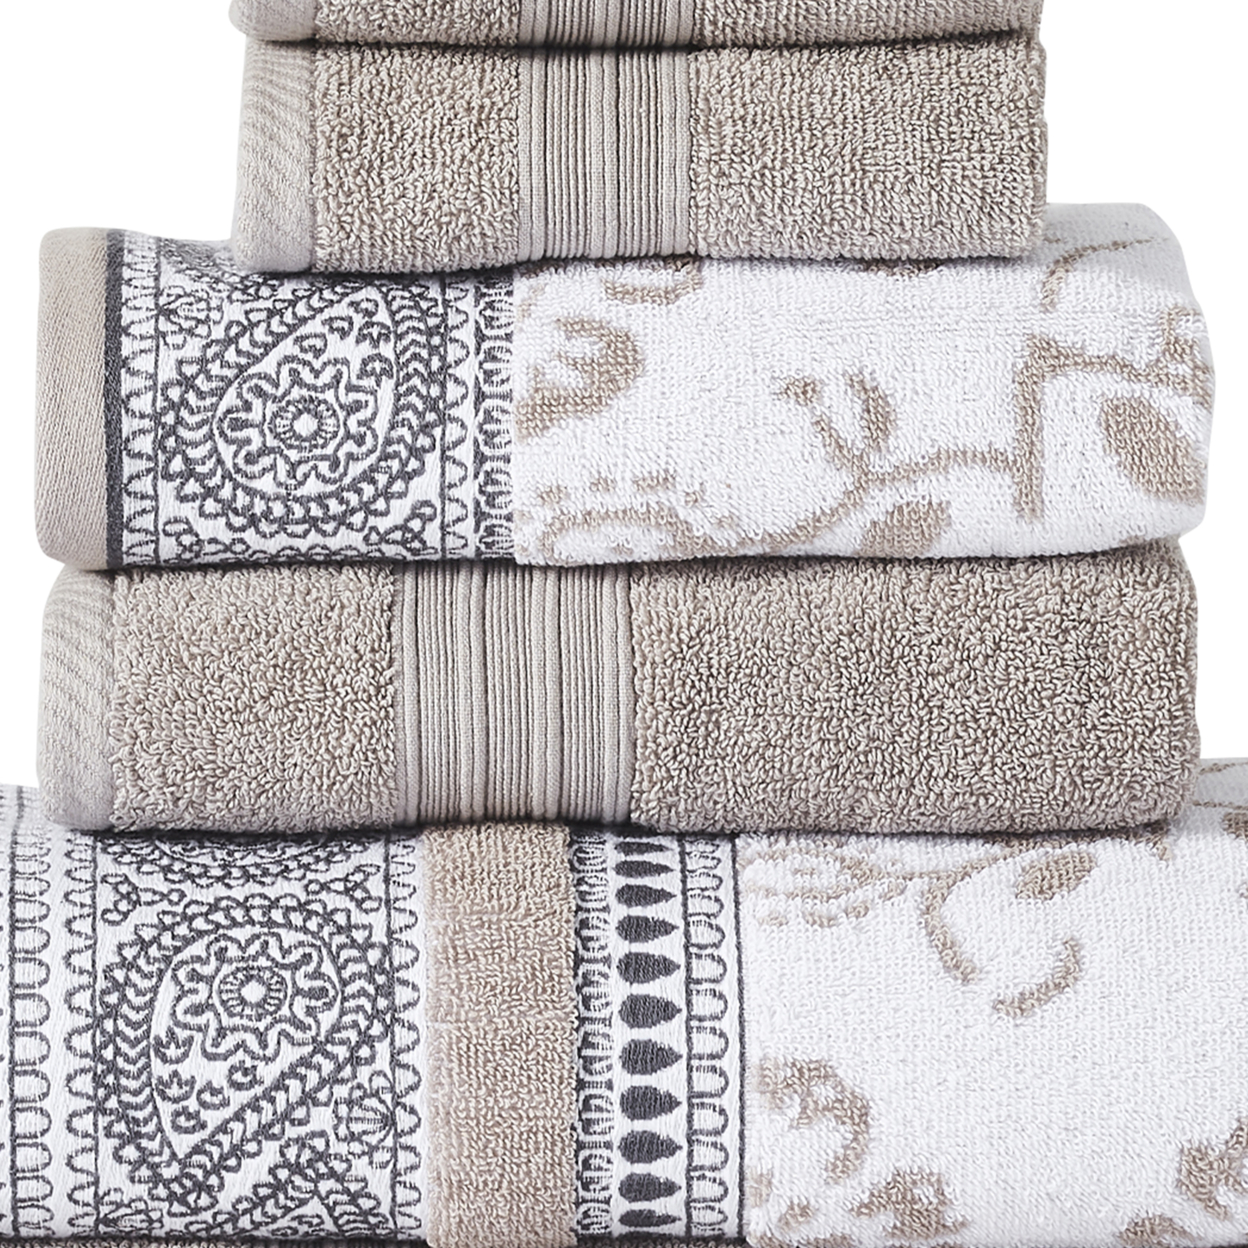 Veria 6 Piece Towel Set With Paisley And Floral Motif Pattern The Urban Port, Beige- Saltoro Sherpi